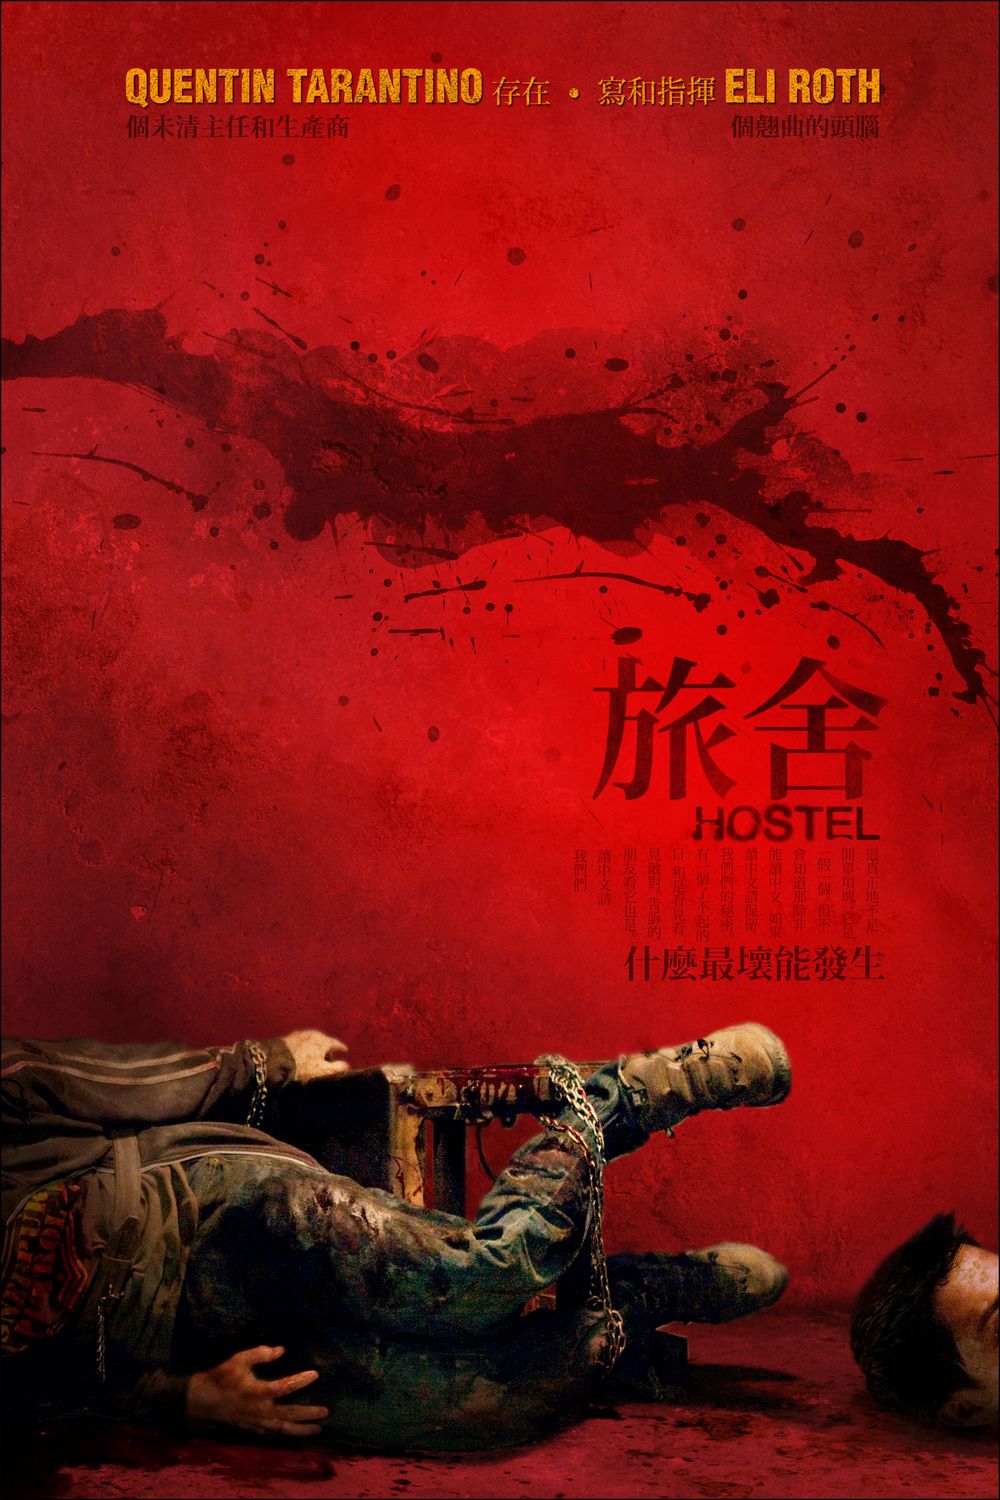 Extra Large Movie Poster Image for Hostel (#4 of 5)